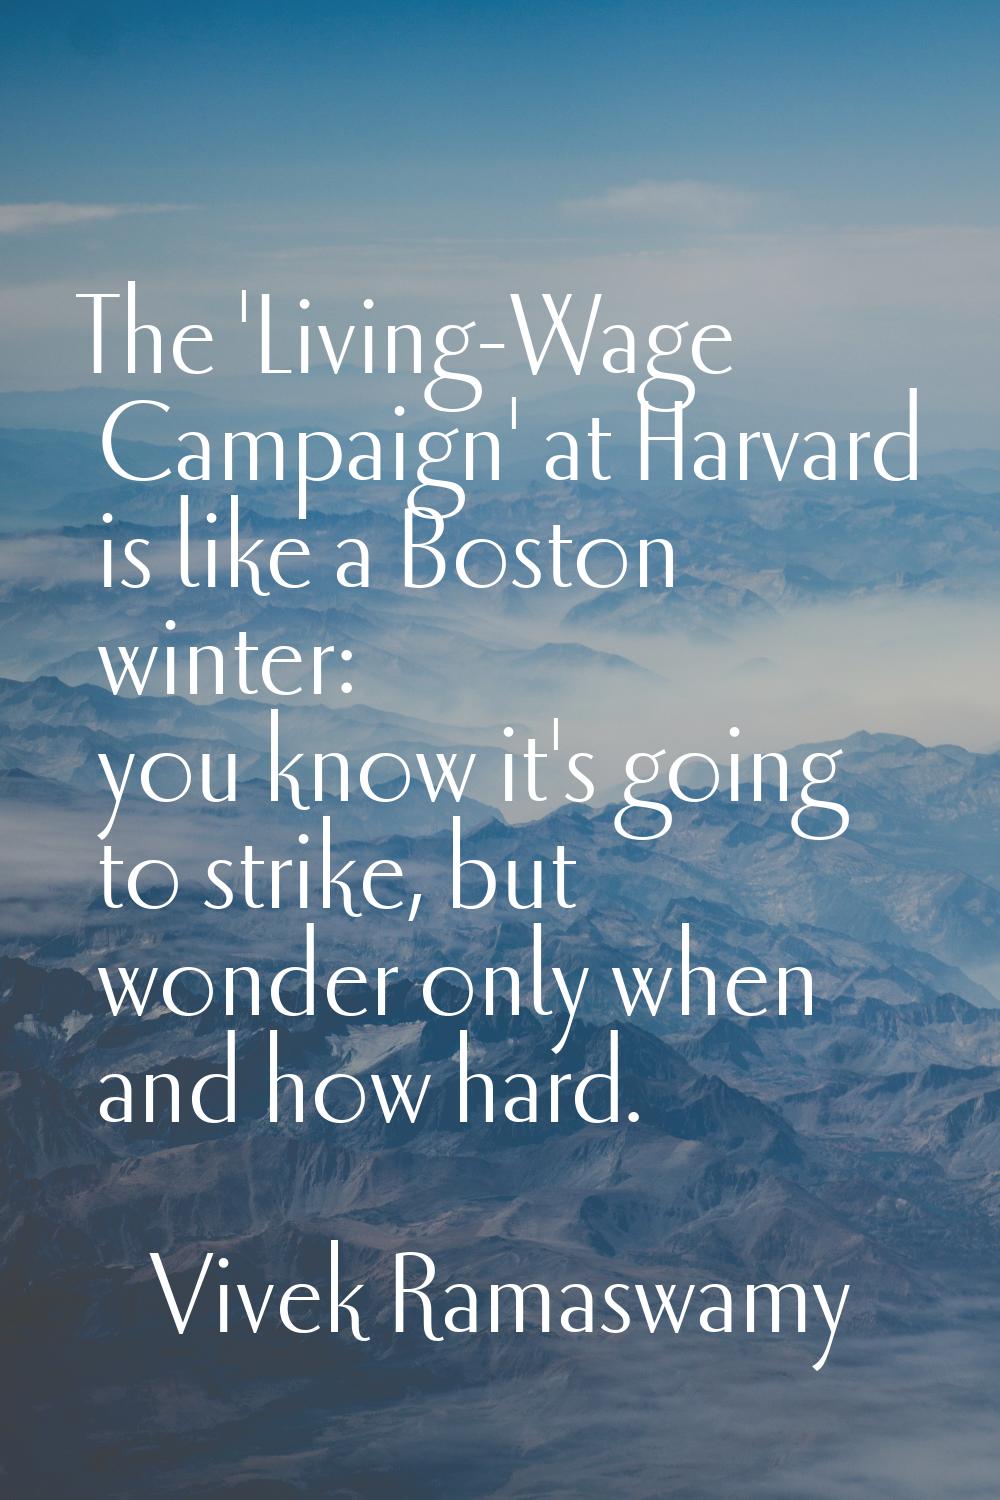 The 'Living-Wage Campaign' at Harvard is like a Boston winter: you know it's going to strike, but w